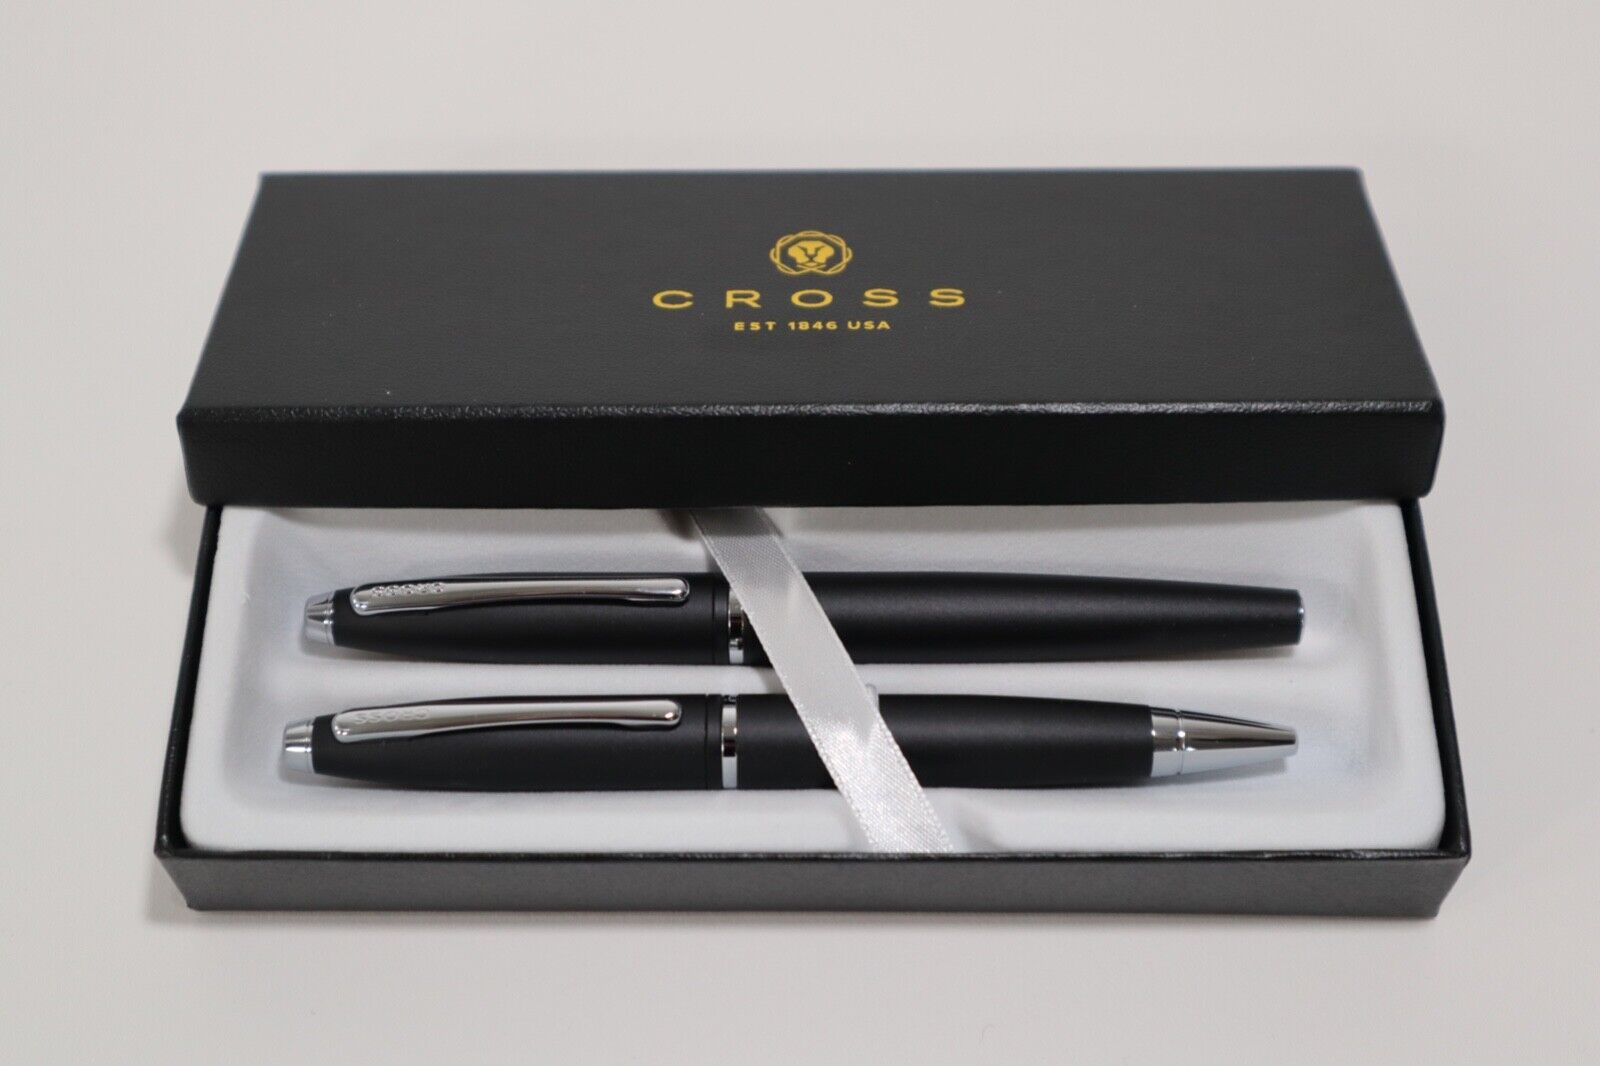 2 in 1 CROSS CALAIS BALLPOINT PEN AT0112-3 BLACK MATTE WITH GIFT BOX